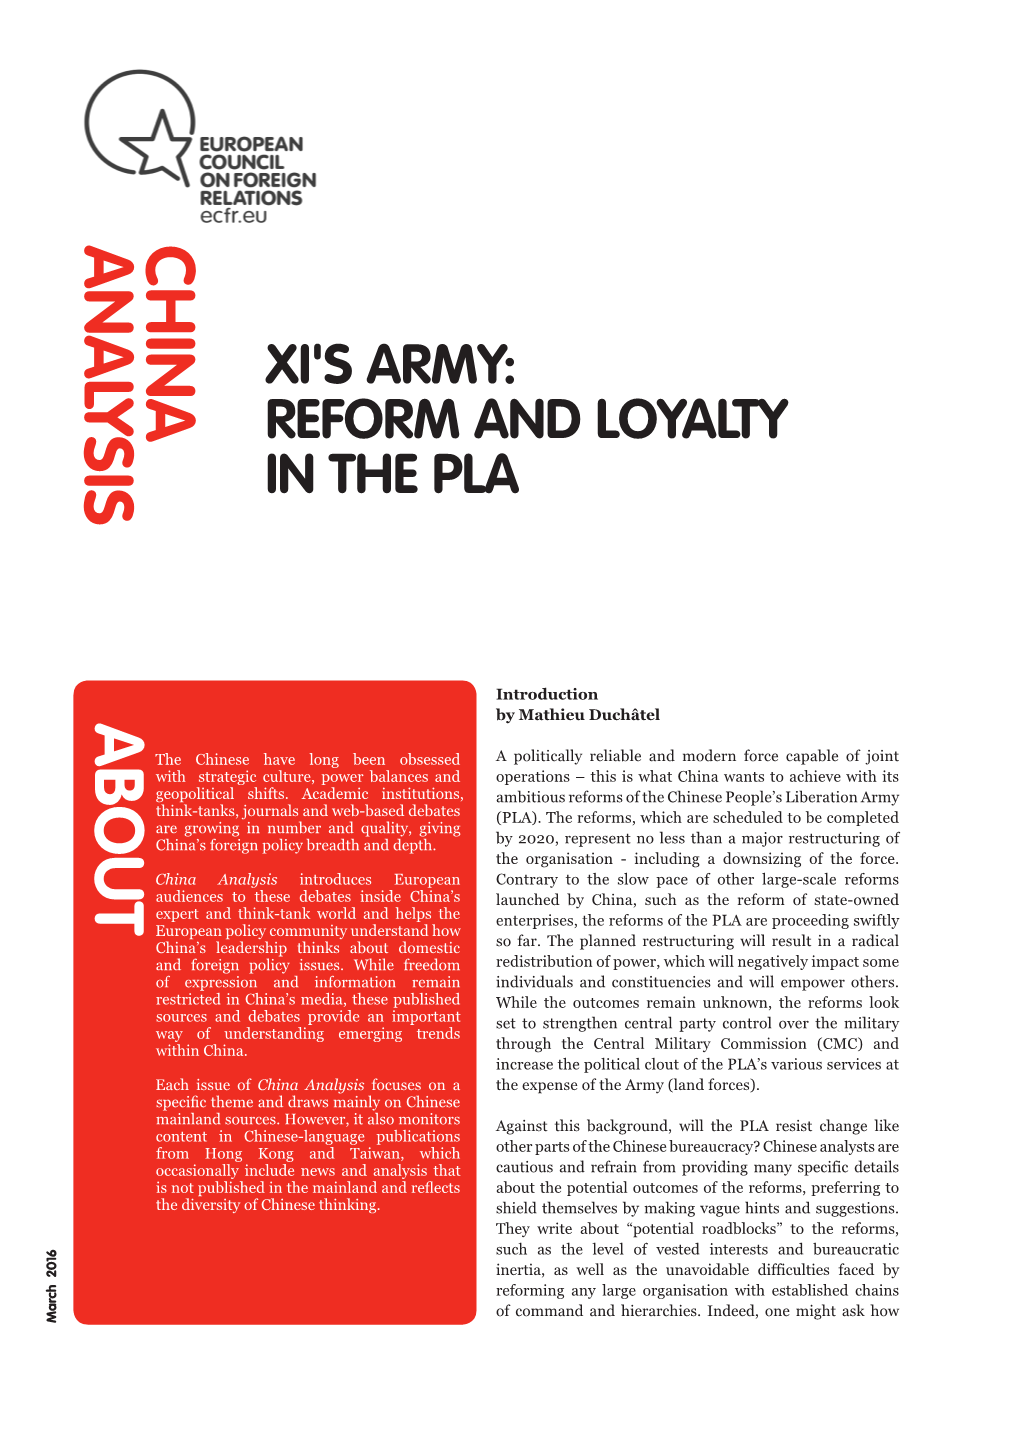 Xi's Army: Reform and Loyalty in The